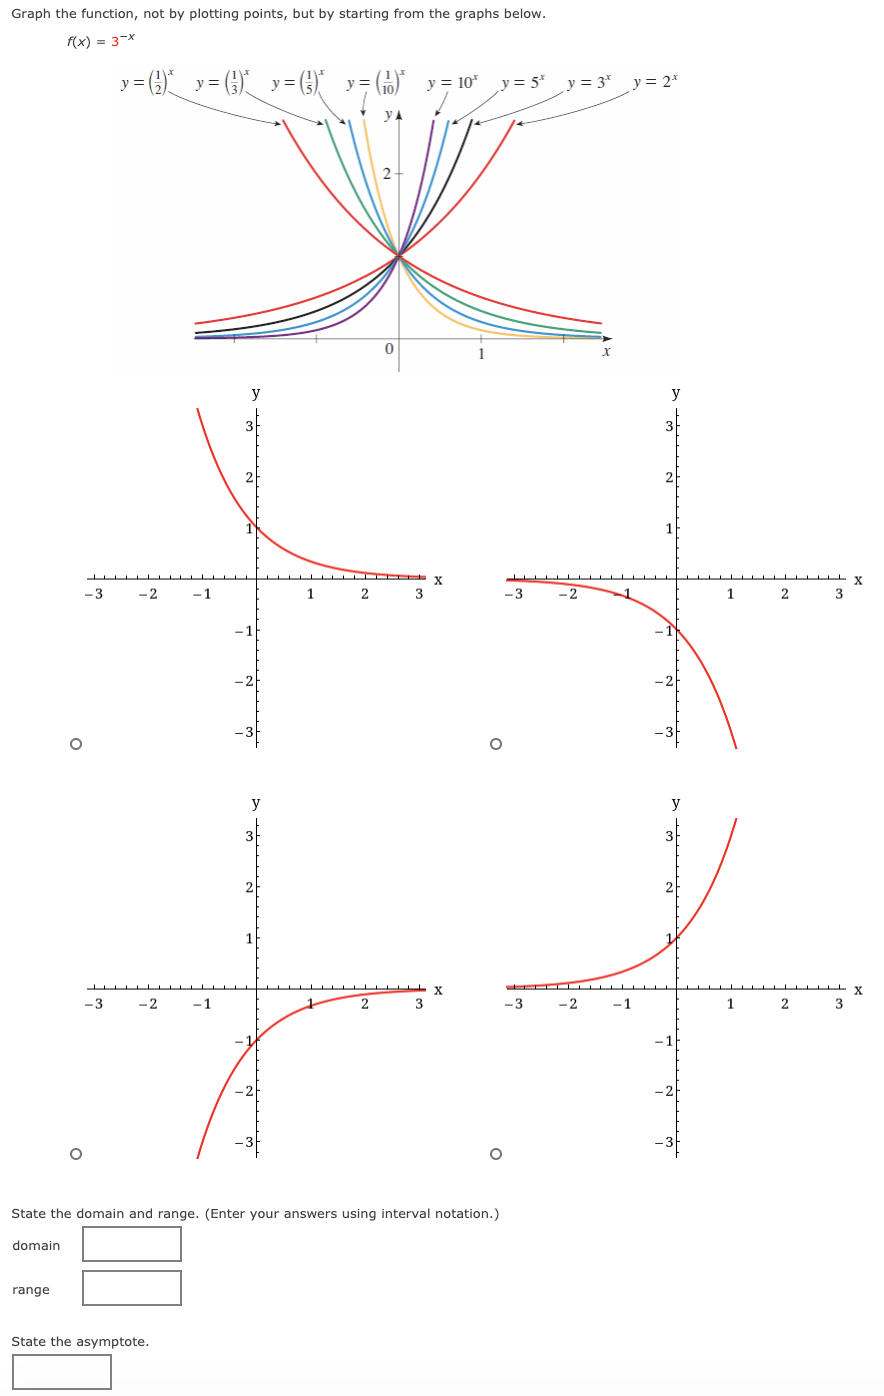 Graph the function, not by plotting points, but by starting from the graphs below.
f(x) = 3-x
y= () y = (9) y=G)
= GG0 y = 10*
y =
y = 5*
y = 3*
y = 2*
yA
2-
y
y
3
-3
-2
-1
-3
-2
3
-2
y
y
3
2
-3
-2
-1
2.
-3
-2
-1
1
2
State the domain and range. (Enter your answers using interval notation.)
domain
range
State the asymptote.
